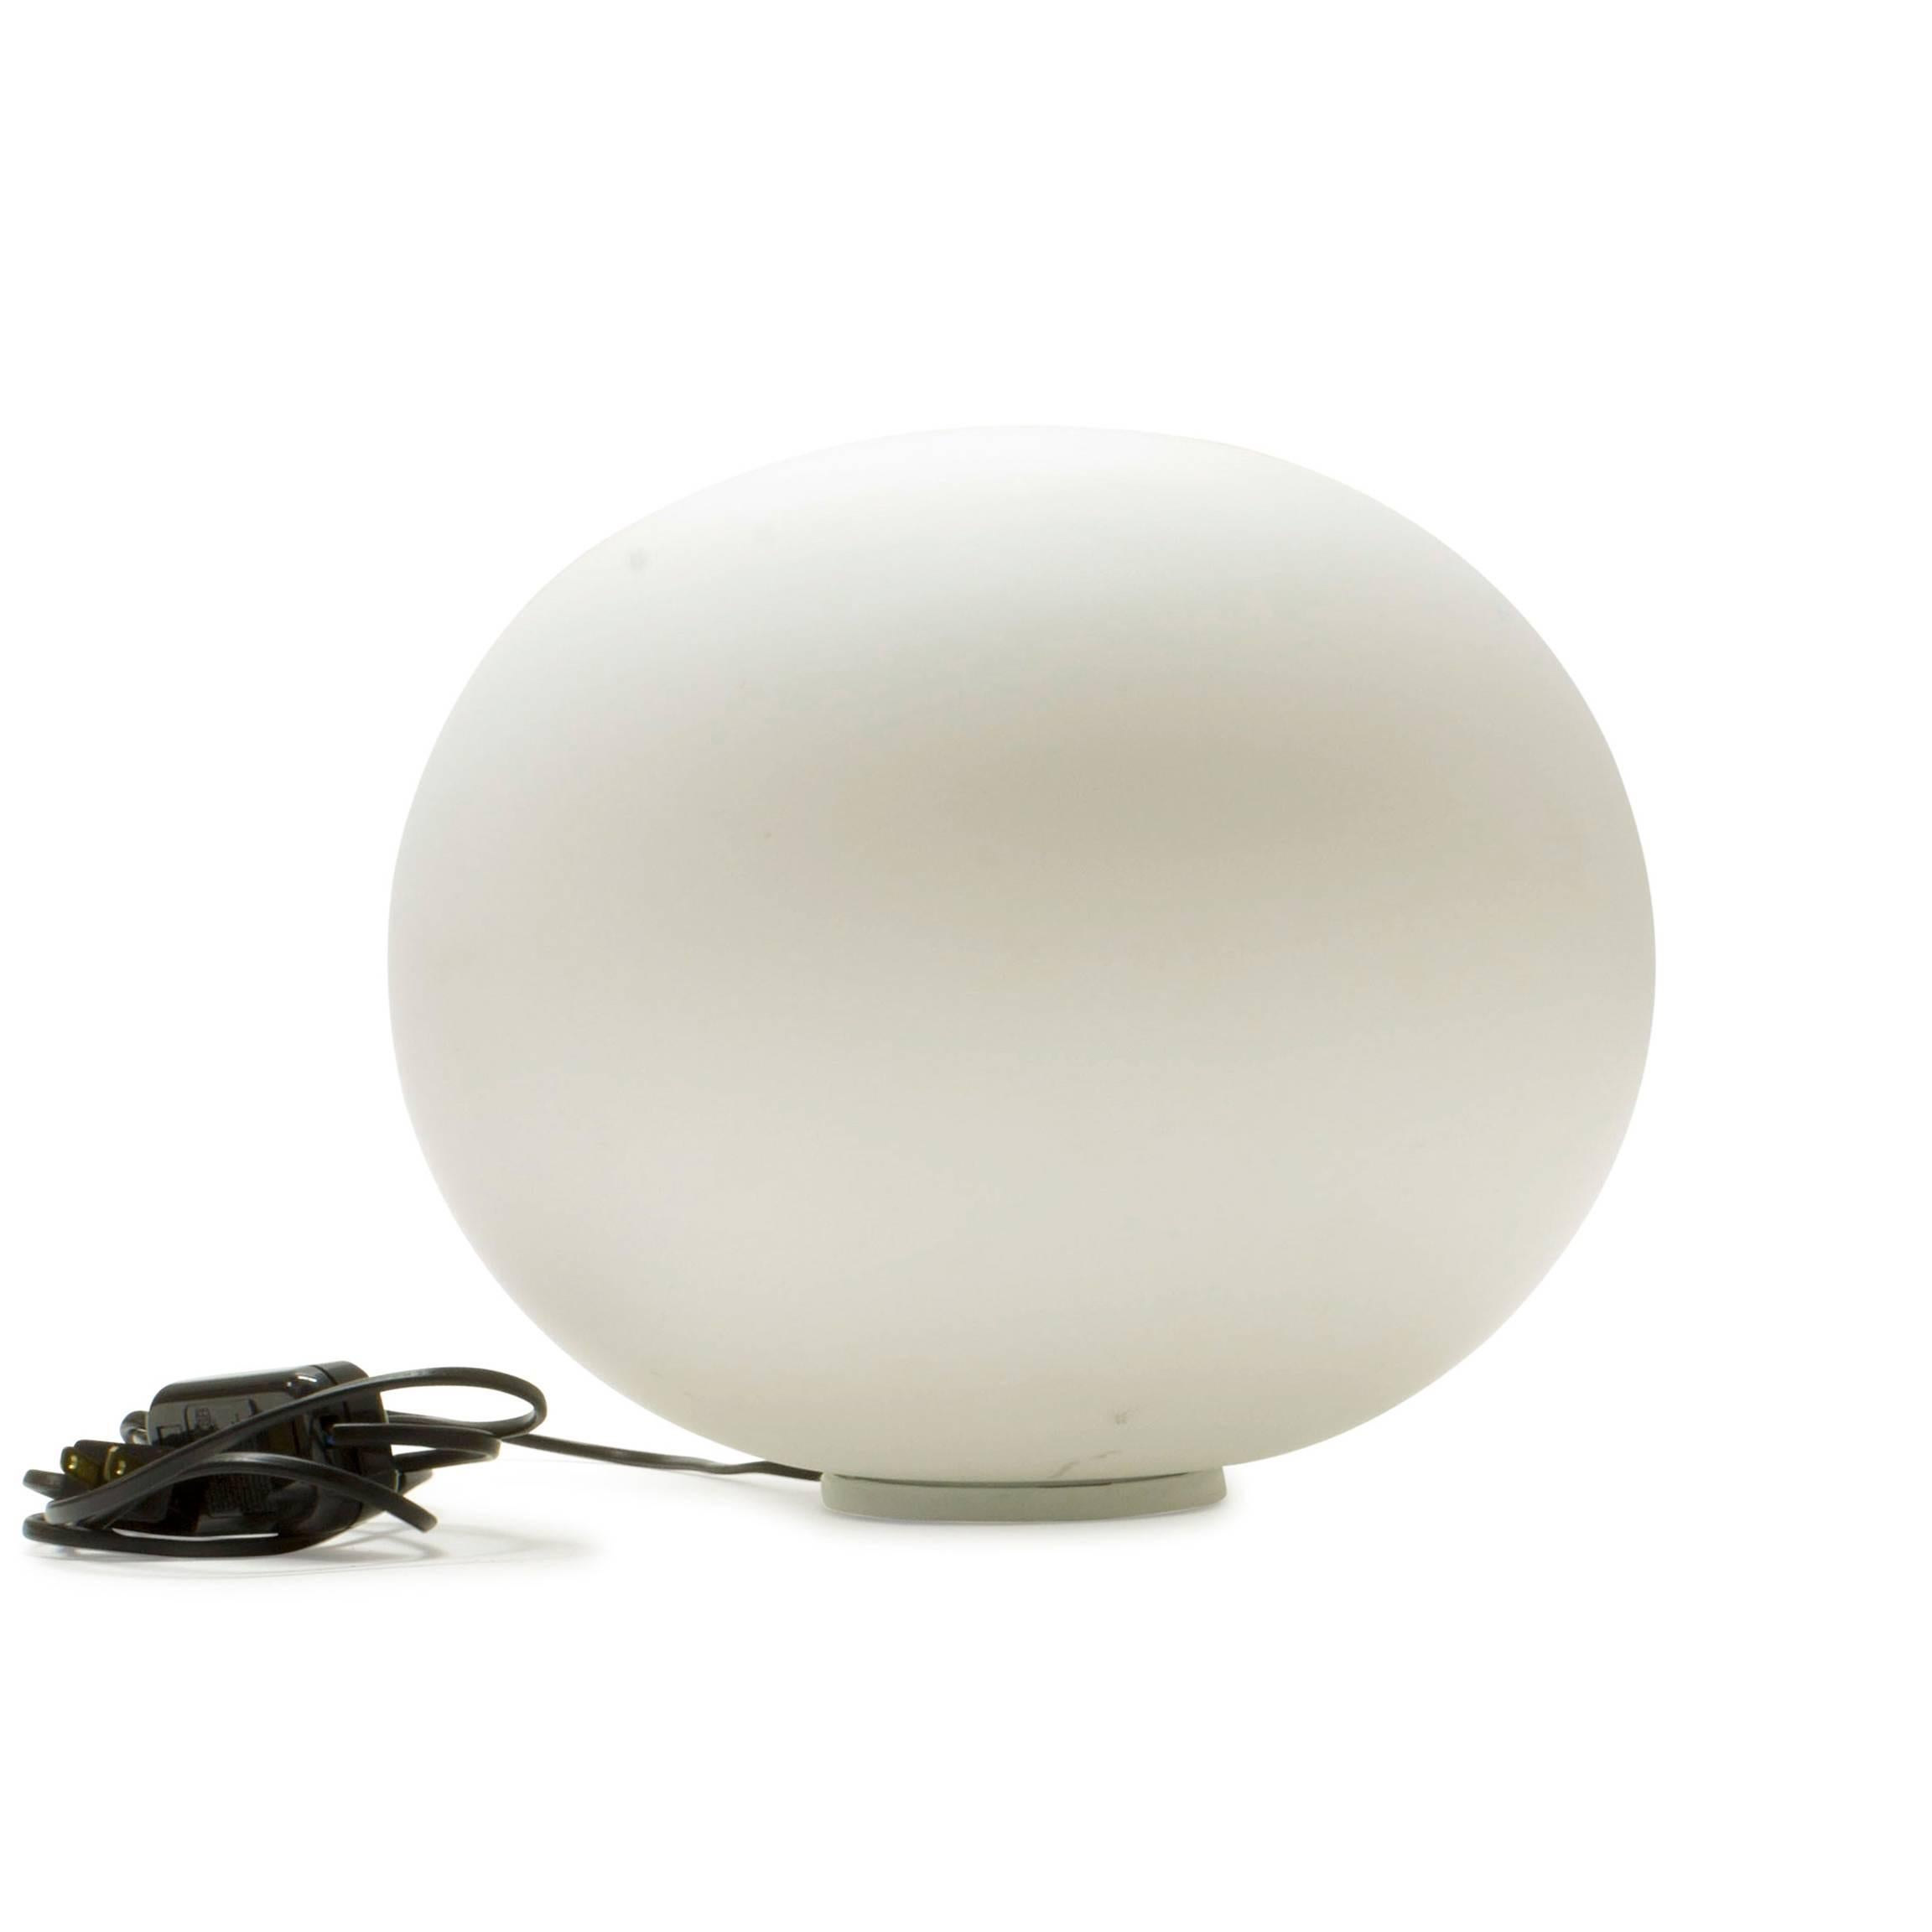 Part of the popular Glo ball series, the Glo ball basic was created in 1998 by artist Jasper Morrison to invoke the radiant calm of a full moon. This unique table lamp has a white acid-etched blown glass diffuser, and the glass body is 30%